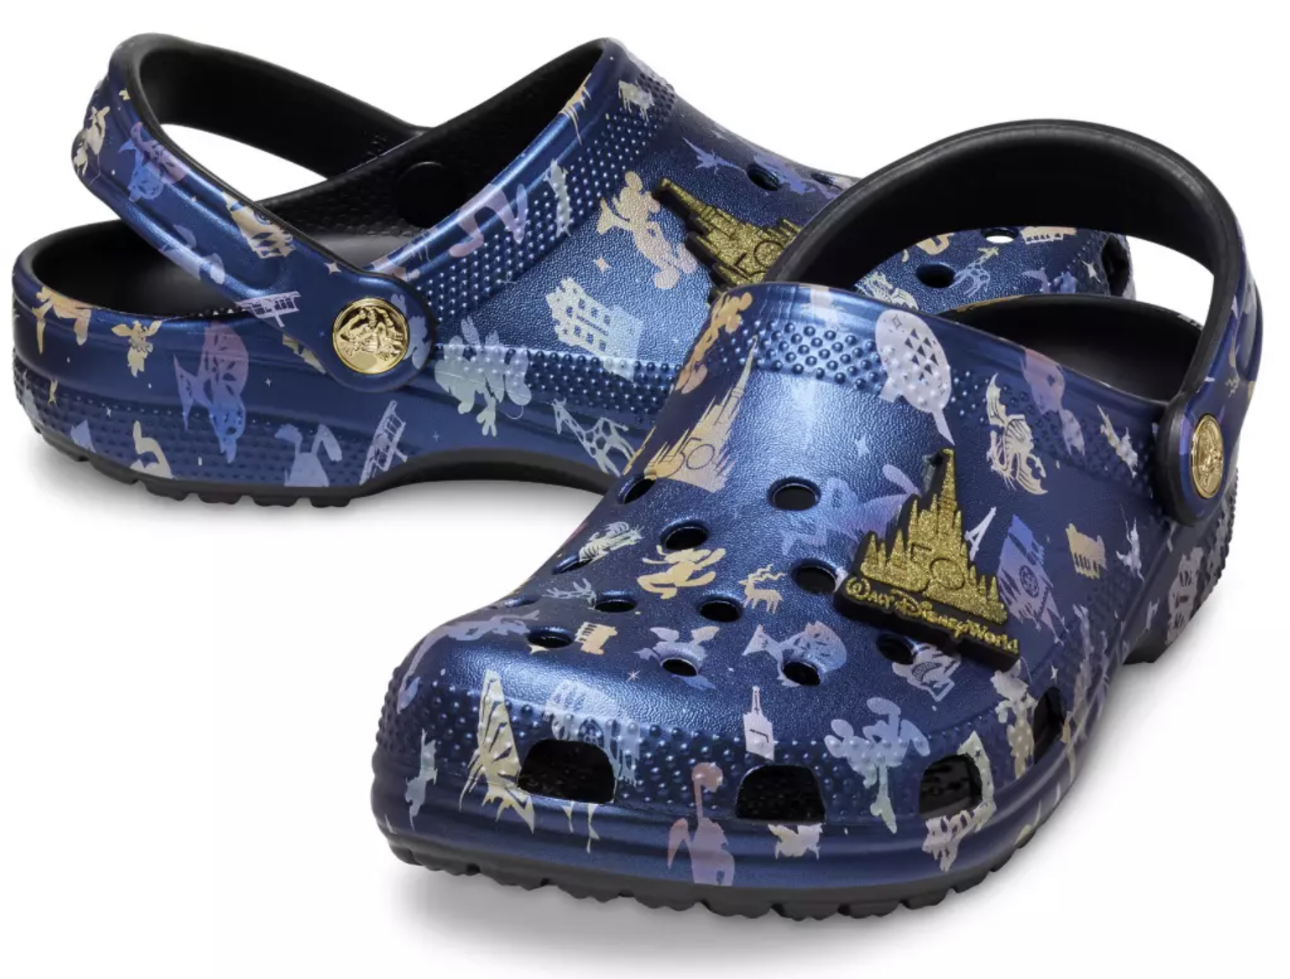 EVERY Pair of Disney Crocs For Adults - AllEars.Net